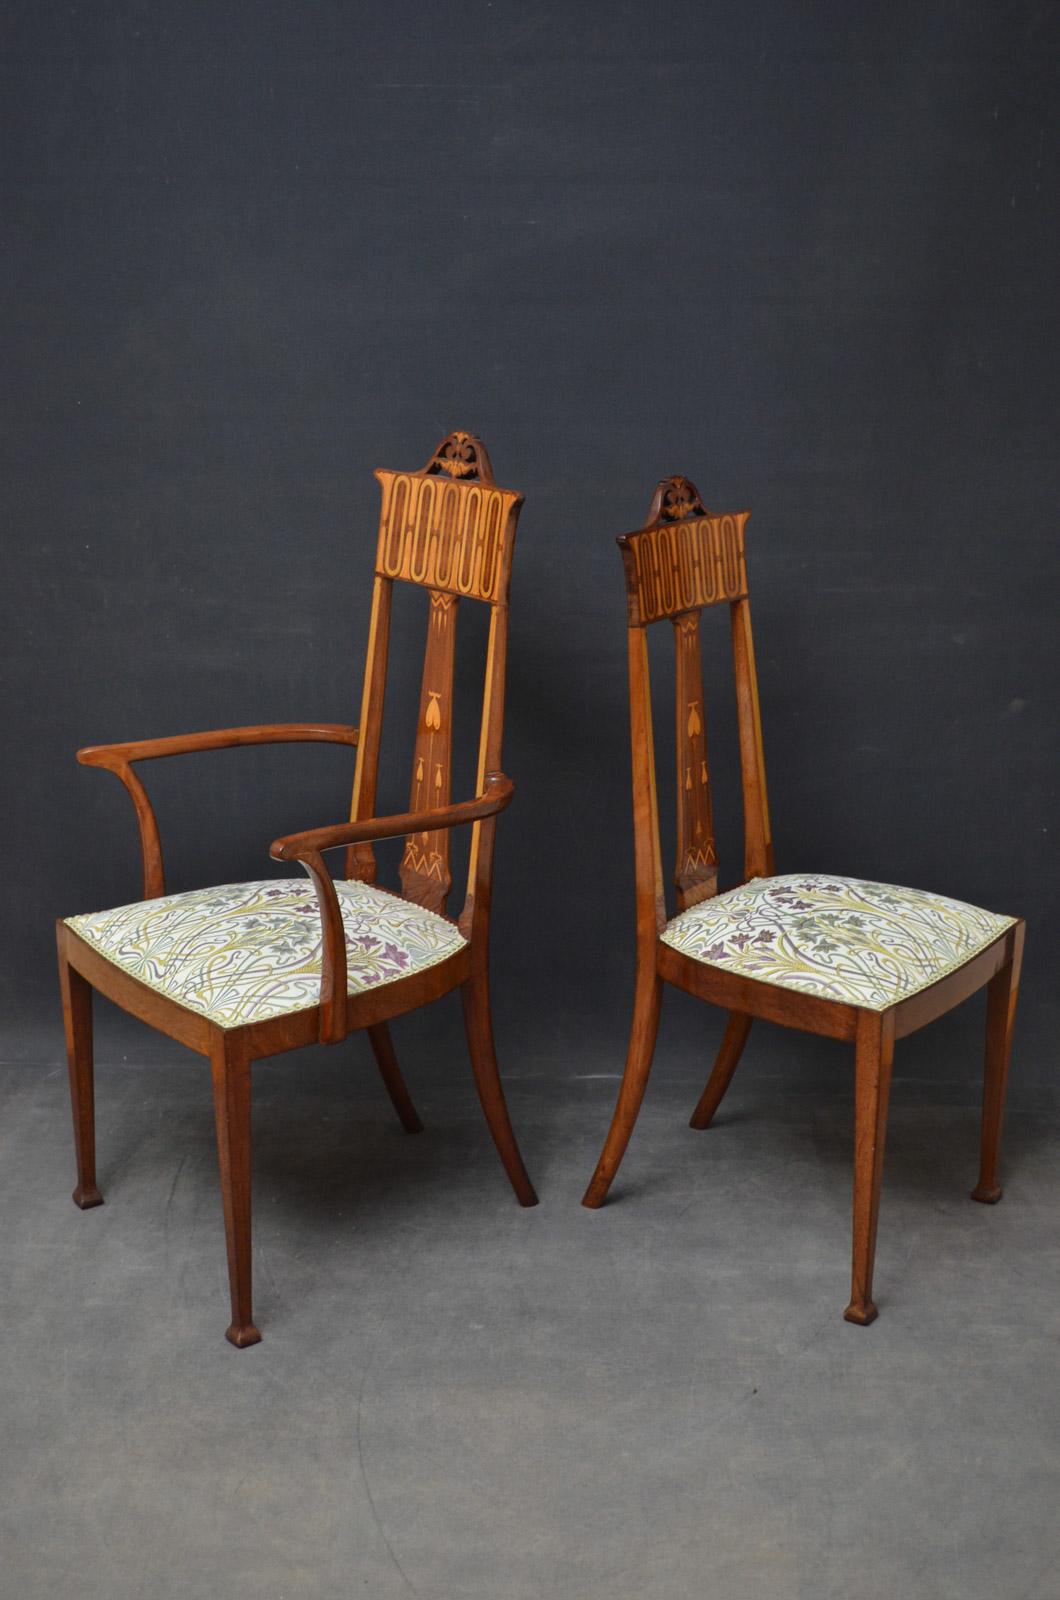 Pair of Art Nouveau Chairs in Mahogany For Sale 6